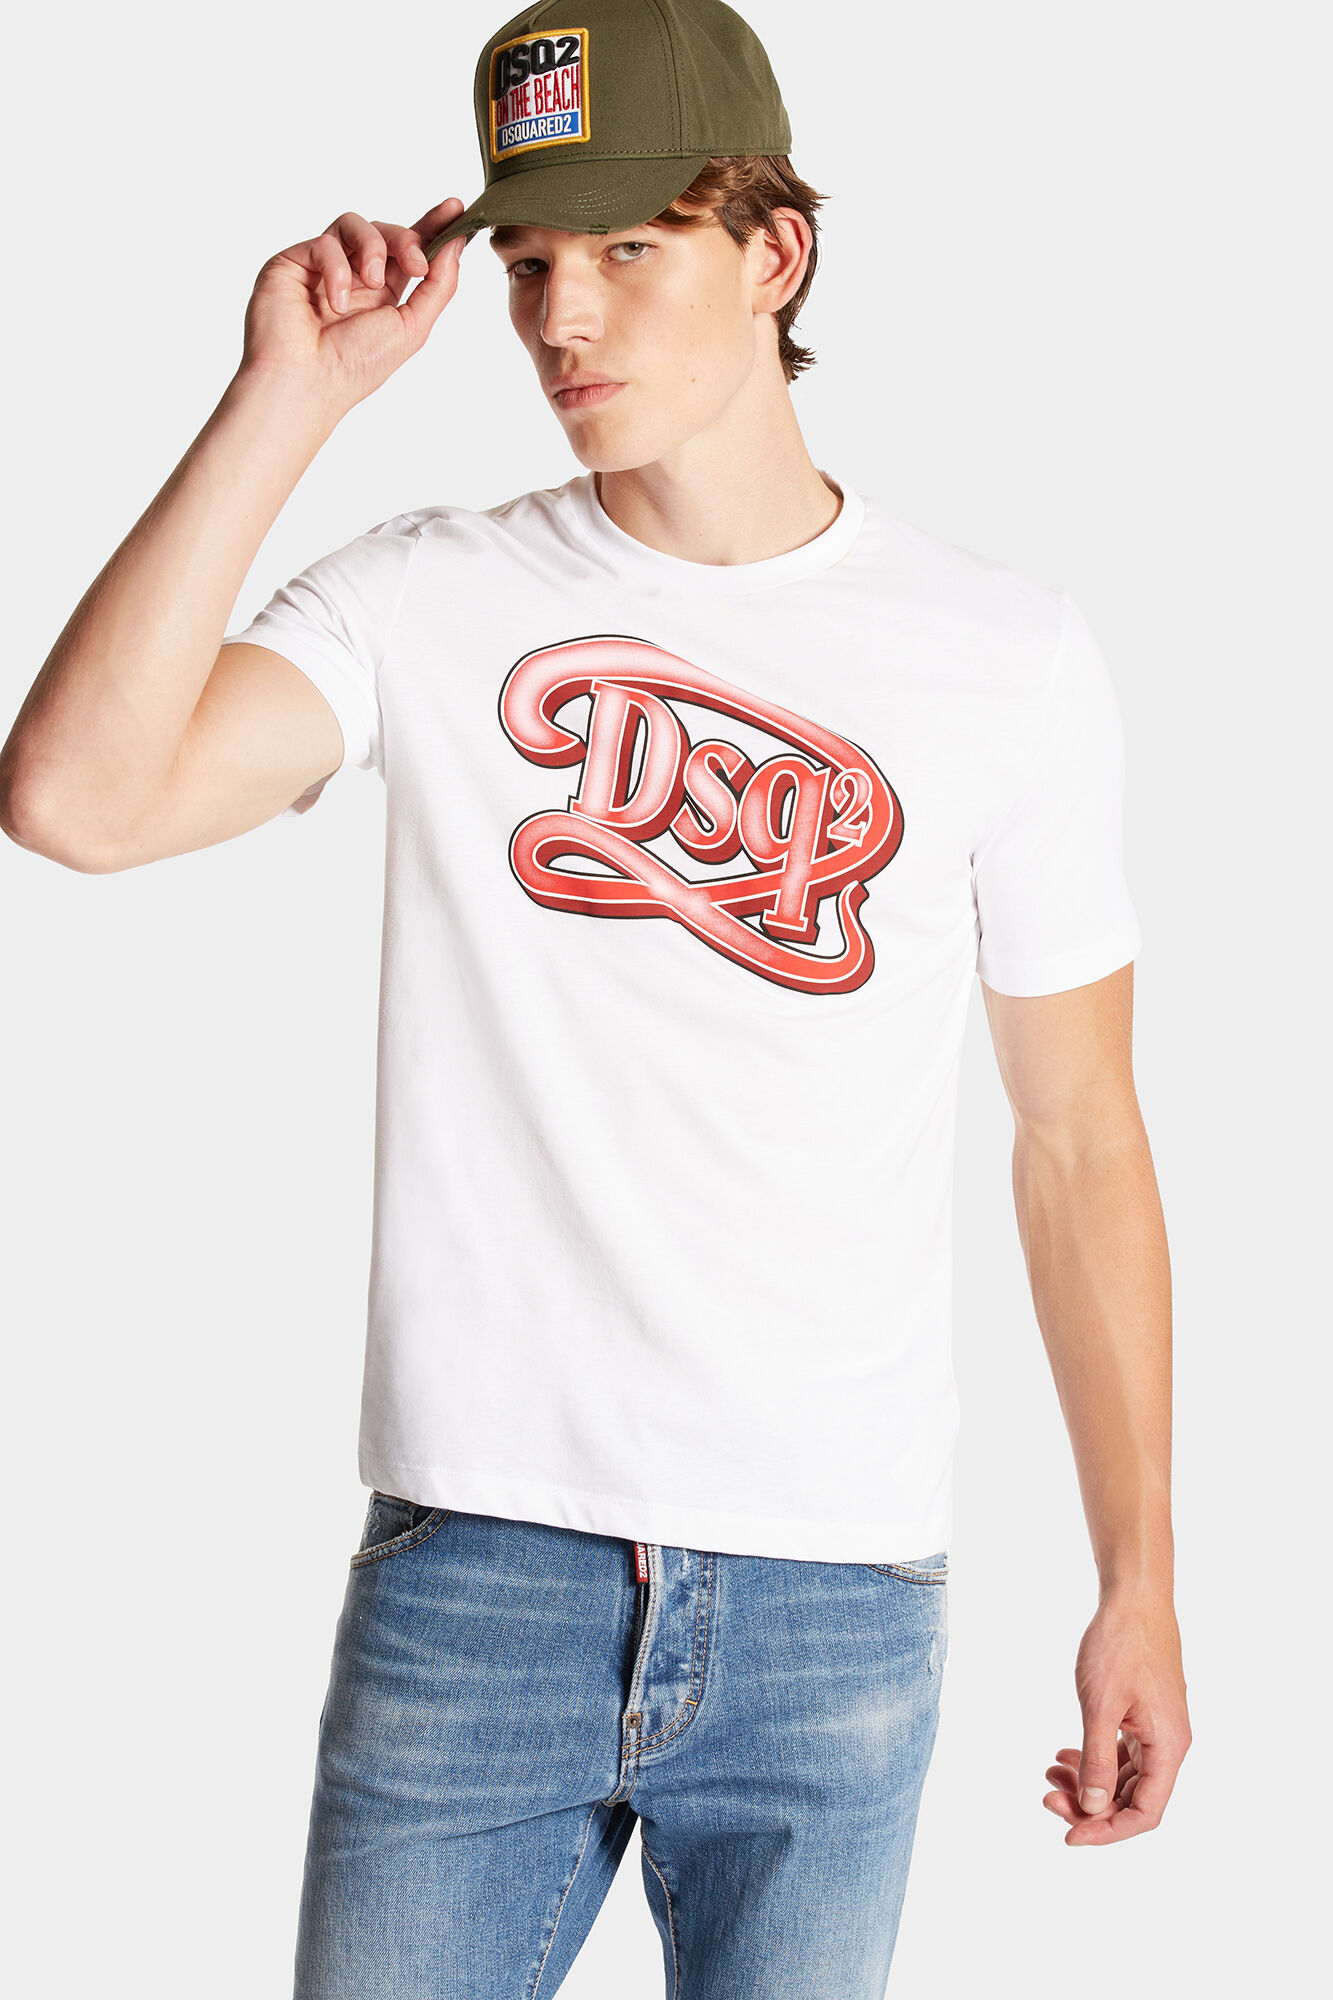 Men's T-Shirts and Tops | DSQUARED2